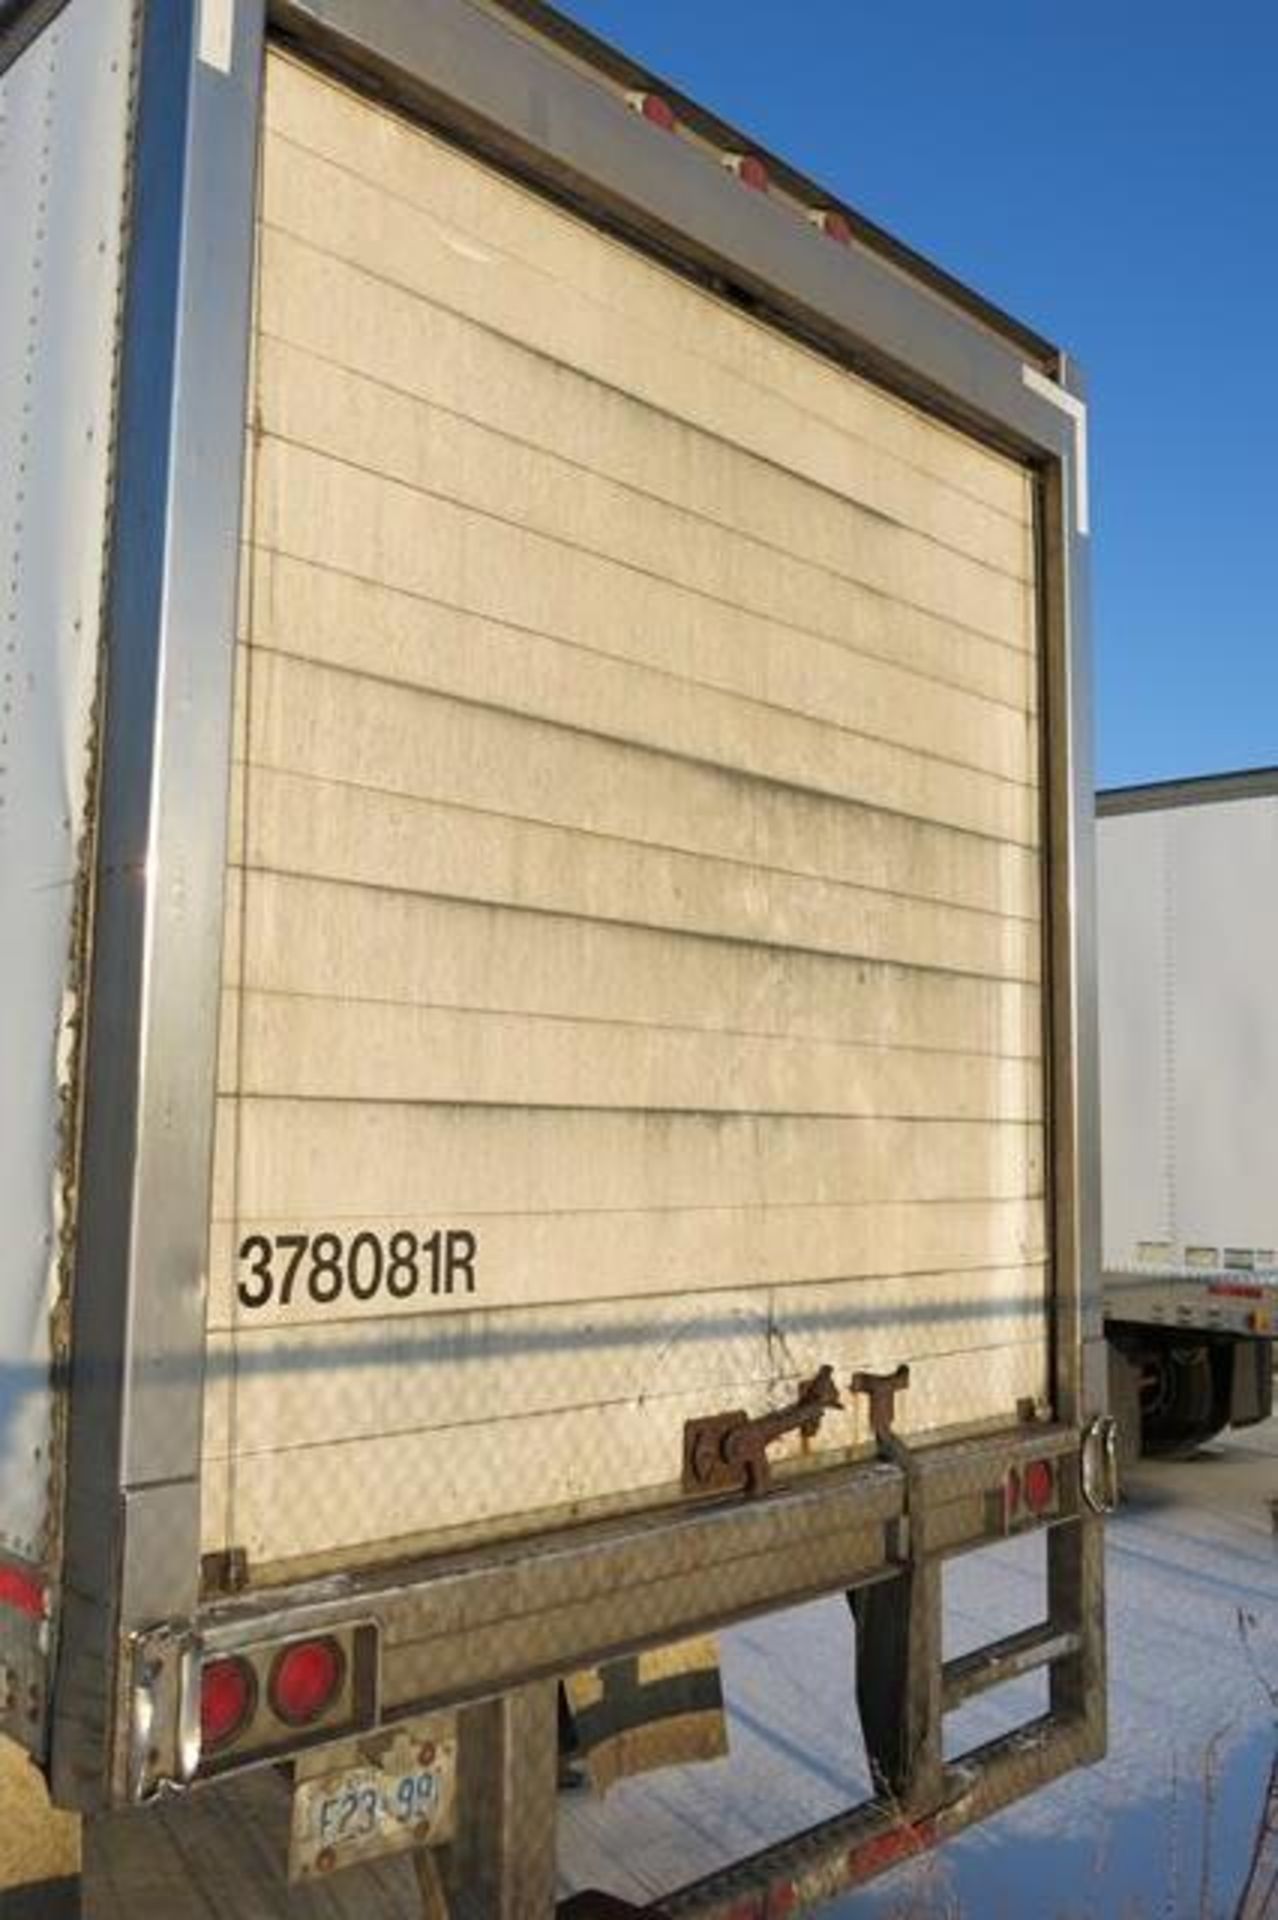 TRAILMOBILE, 53' REFRIGERATED VAN TRAILER, ROLLUP DOOR, THERMO KING, SB-210+, REEFER, 9,197 HOURS, - Image 6 of 13